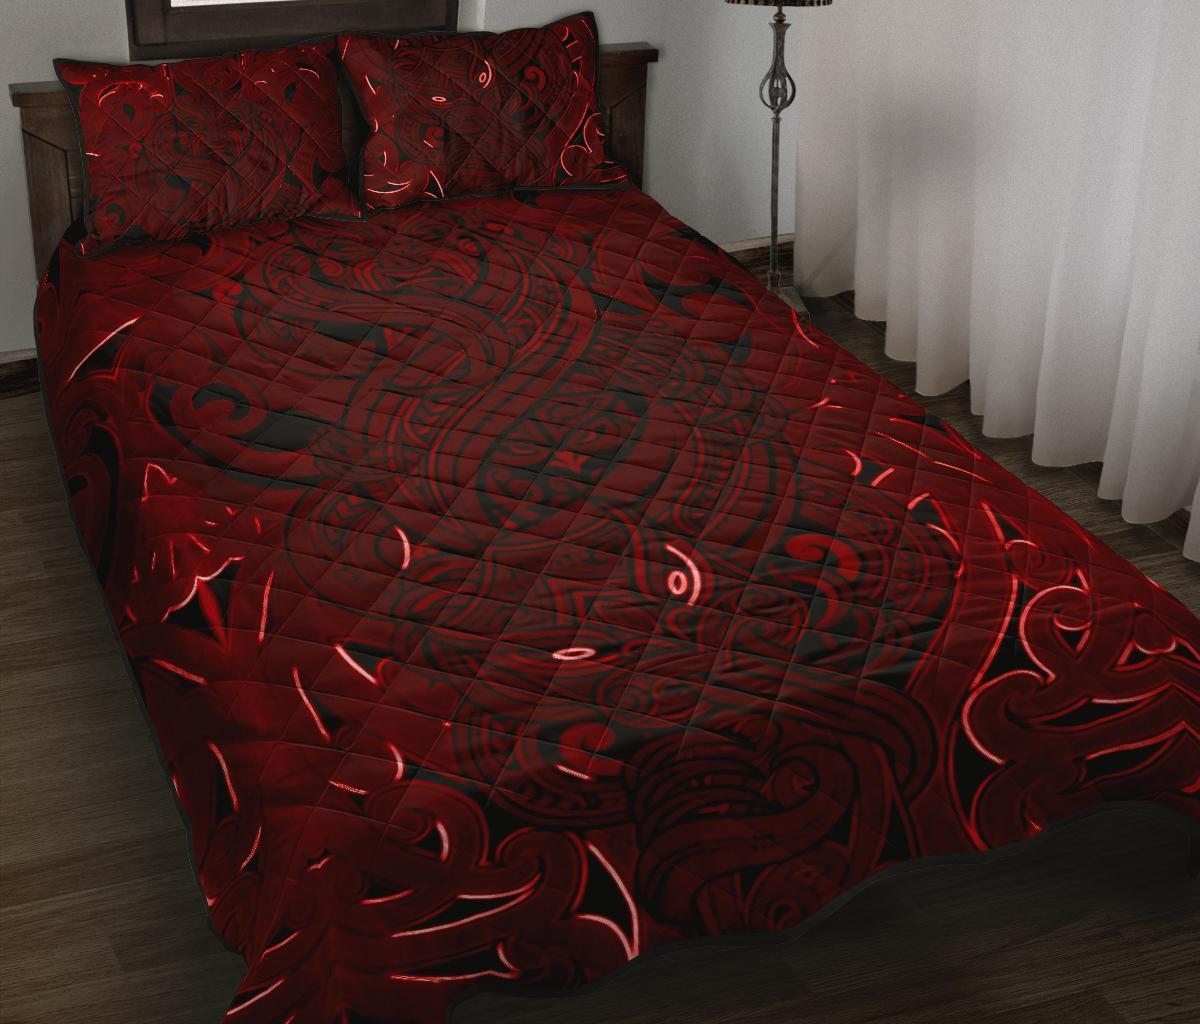 New Zealand Quilt Bed Set, Maori Gods Quilt And Pillow Cover Tumatauenga (God Of War) - Red Red - Polynesian Pride